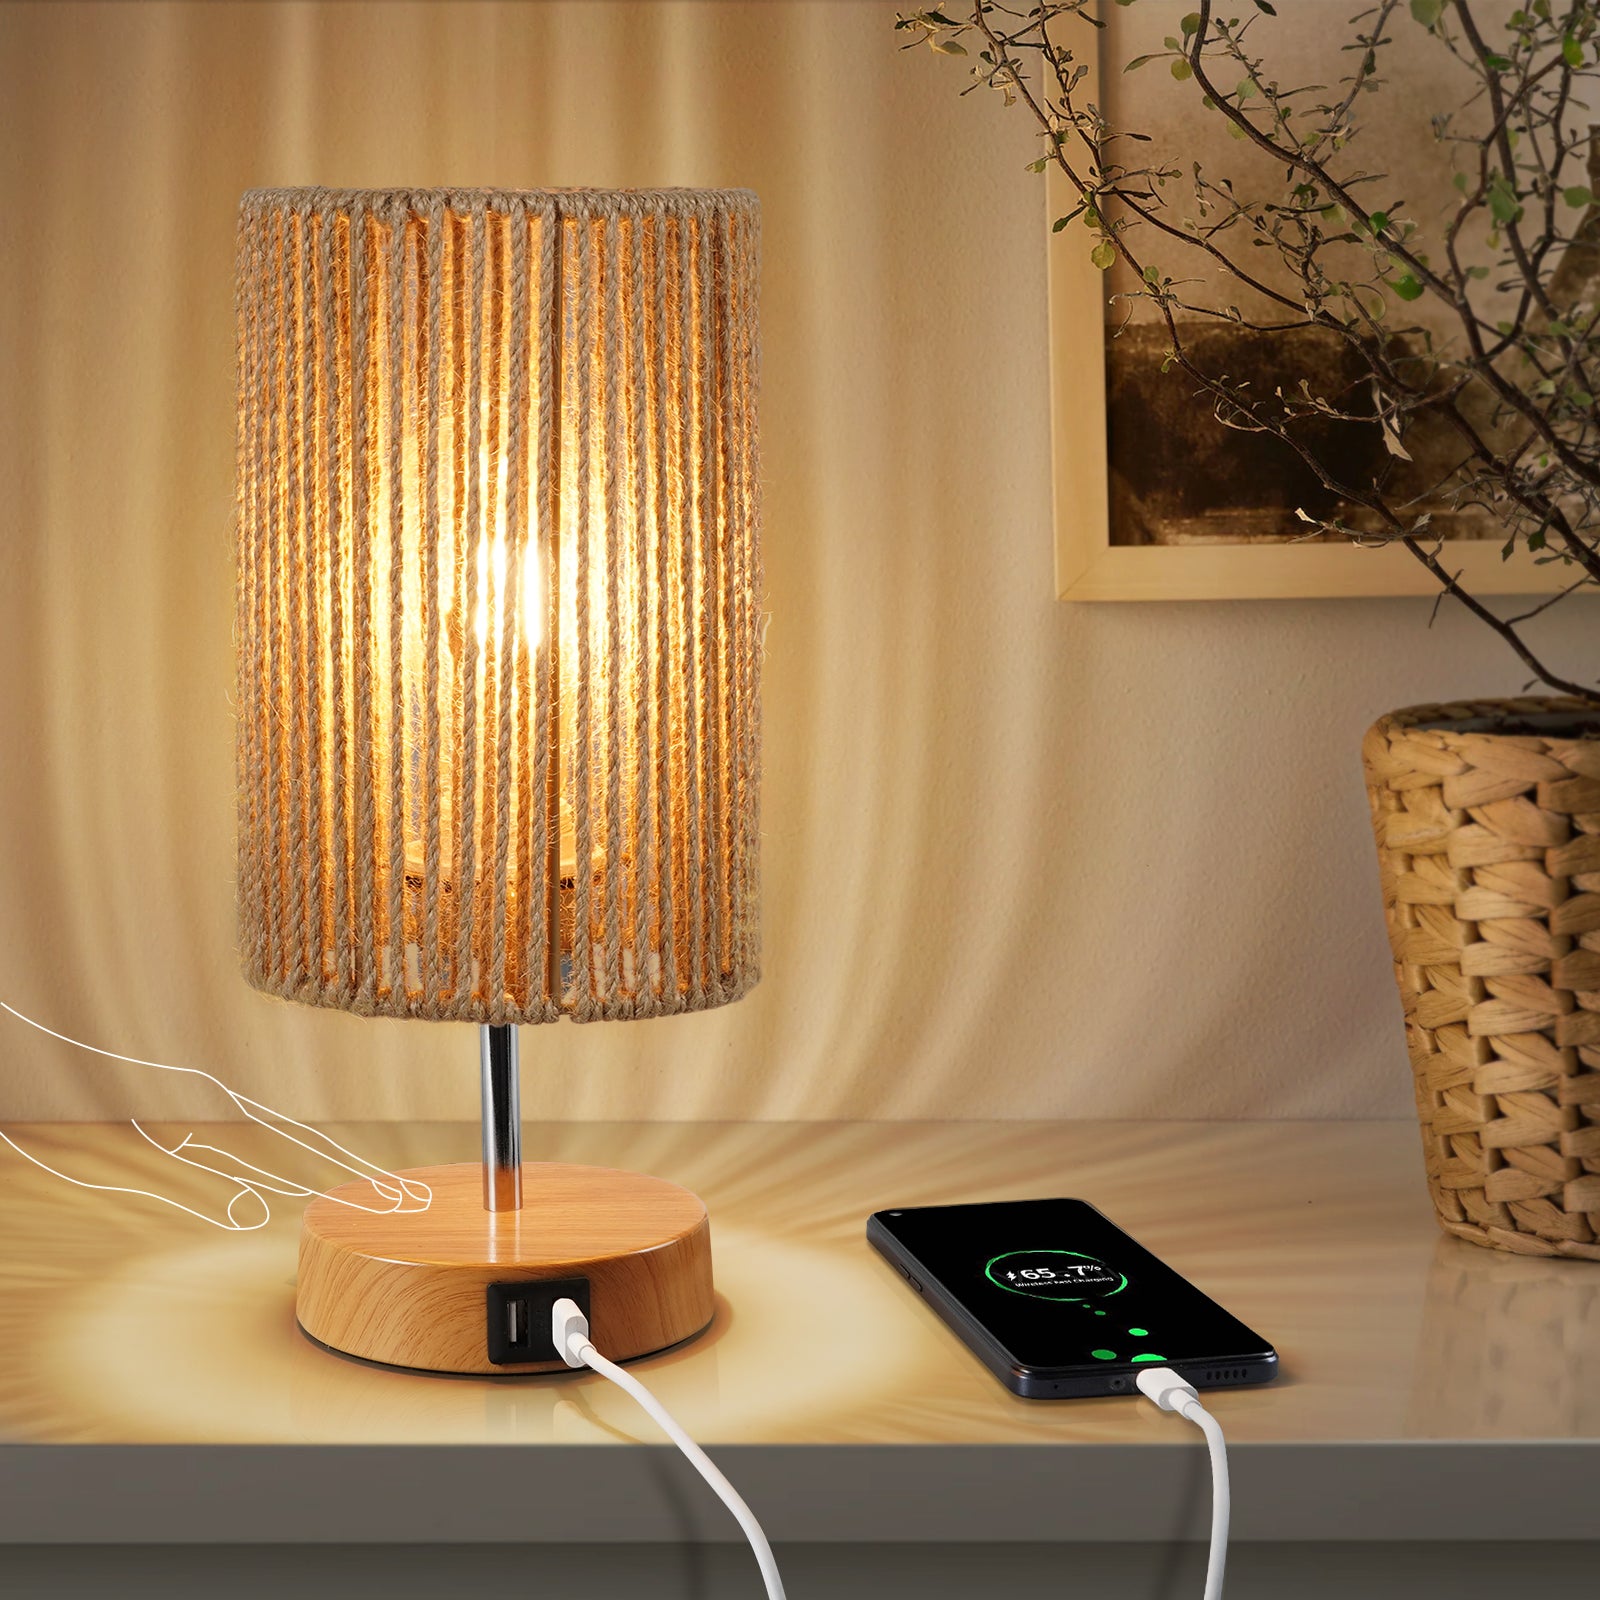 N08 Desk Lamp with 2 USB Charging Ports Touch Control for Bedroom